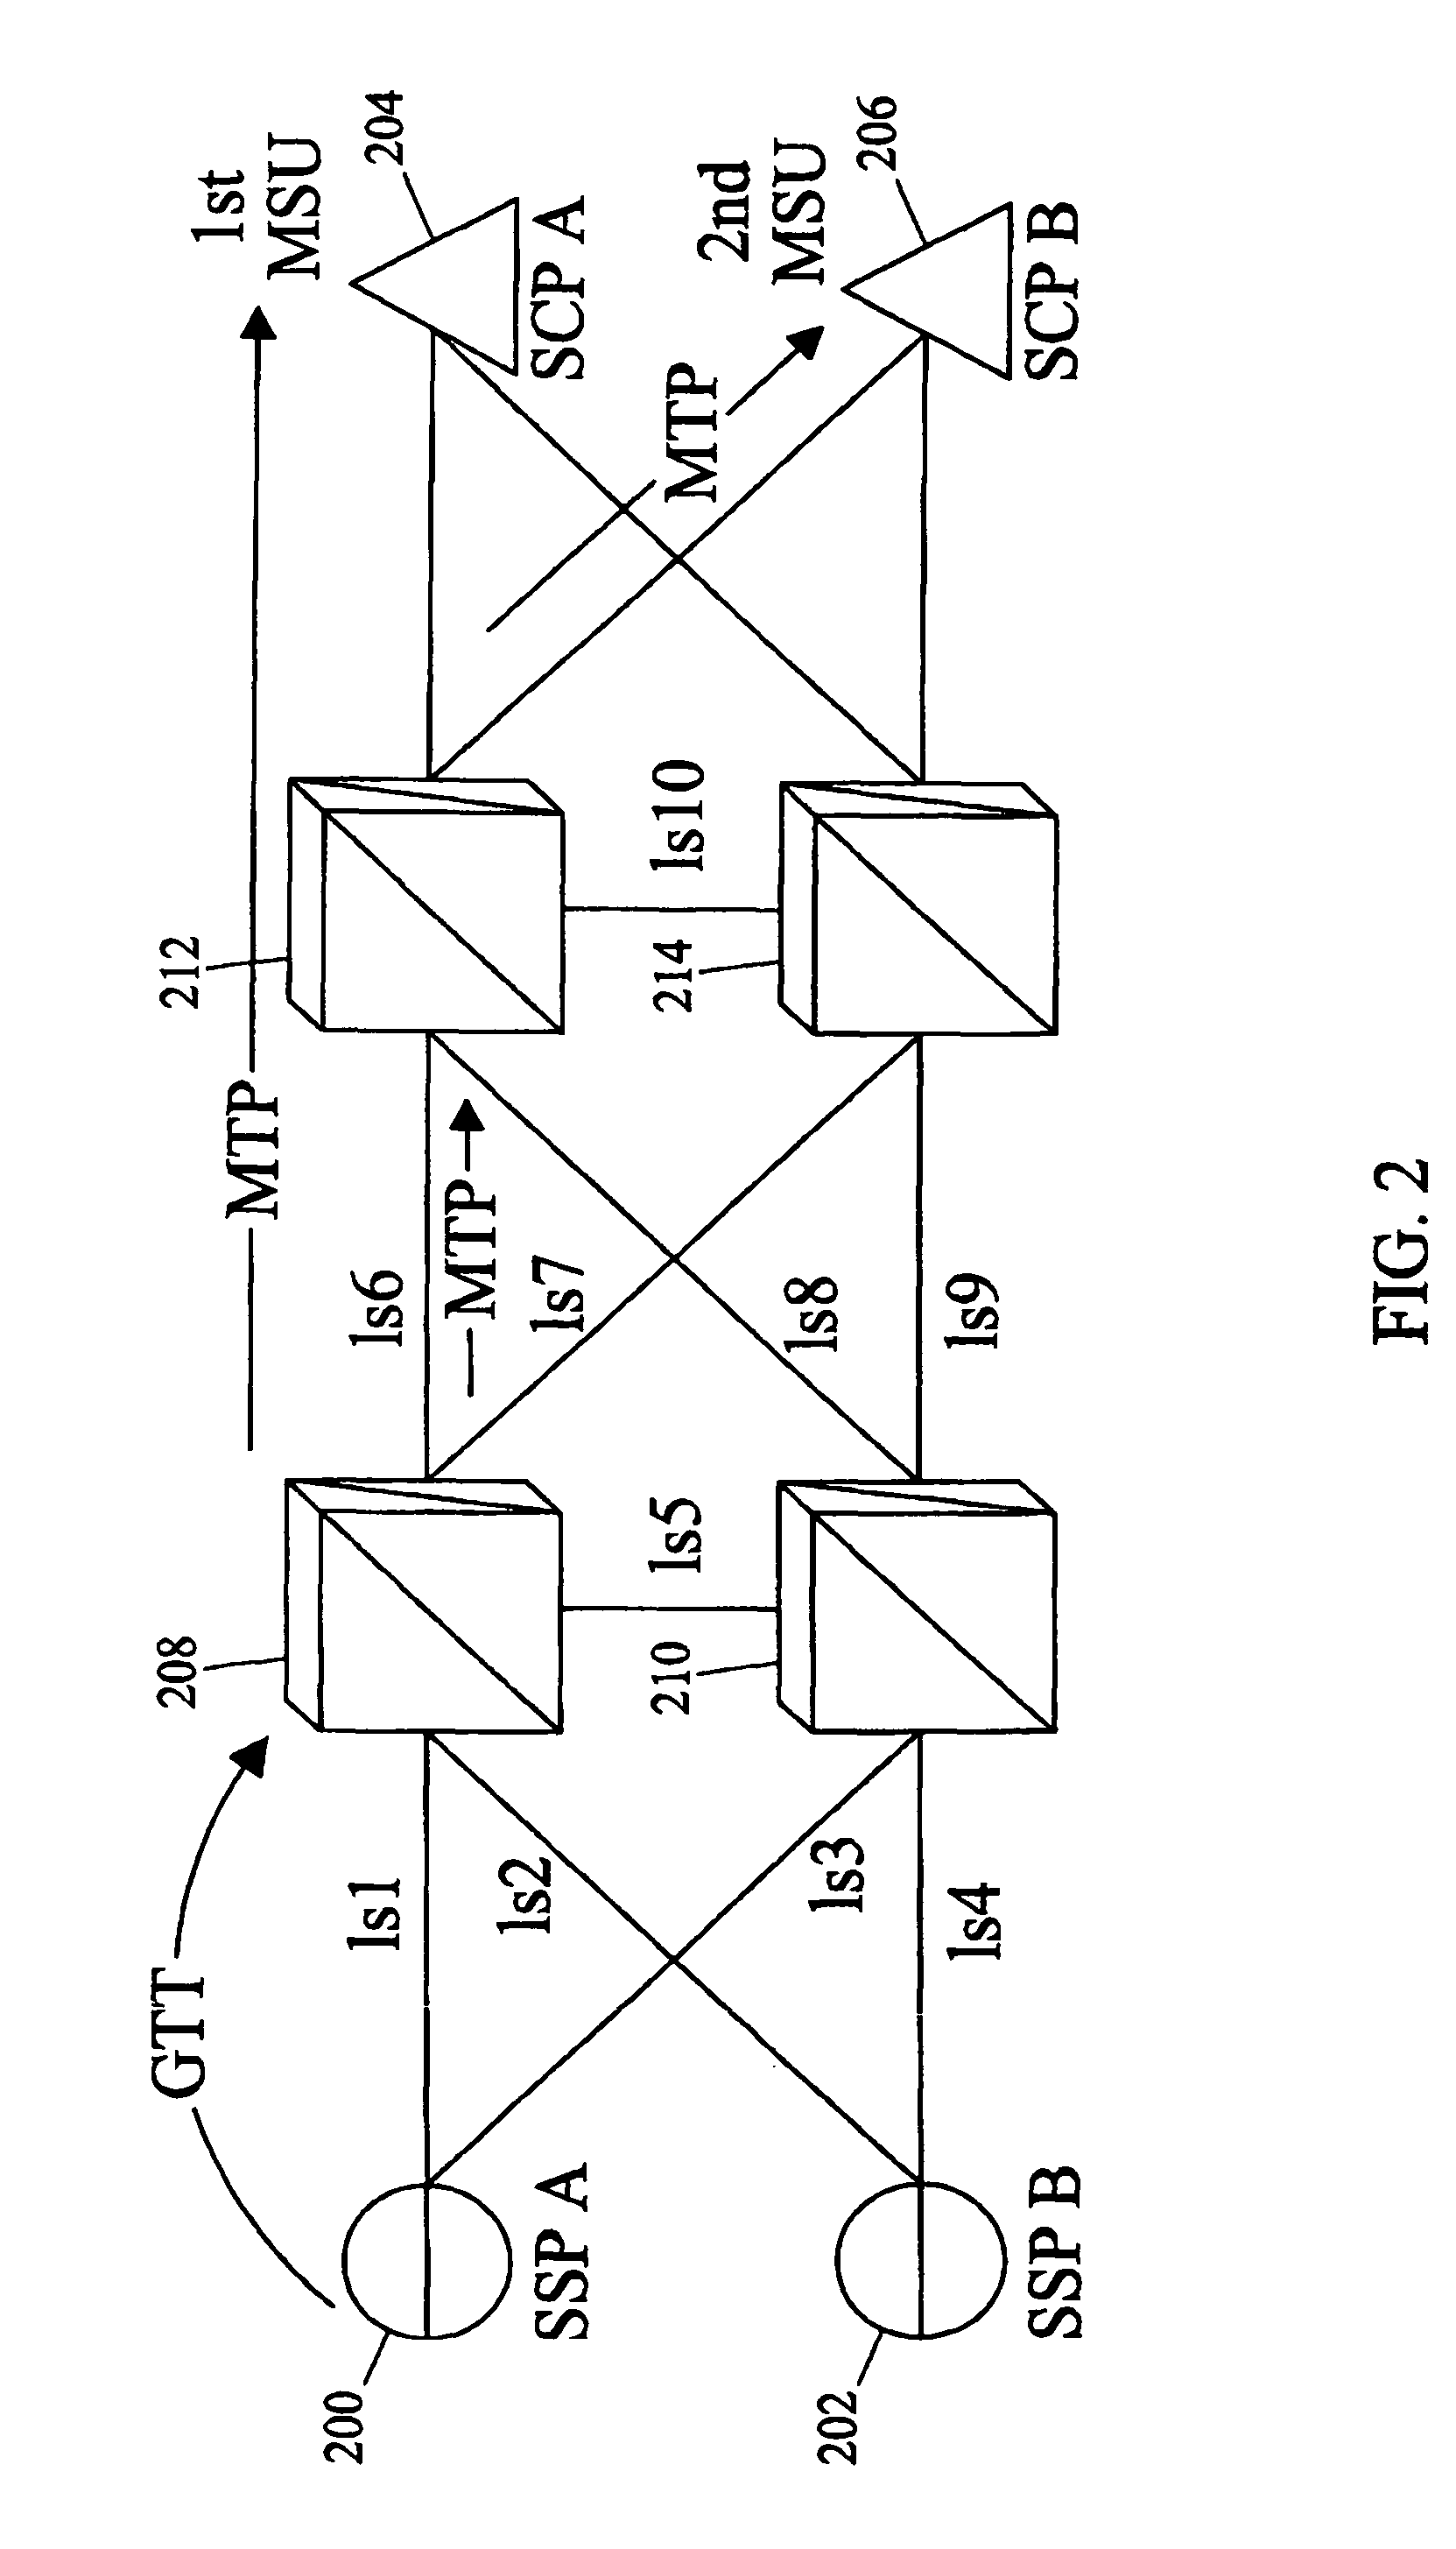 Methods and systems for message transfer part (MTP) load sharing using MTP load sharing groups